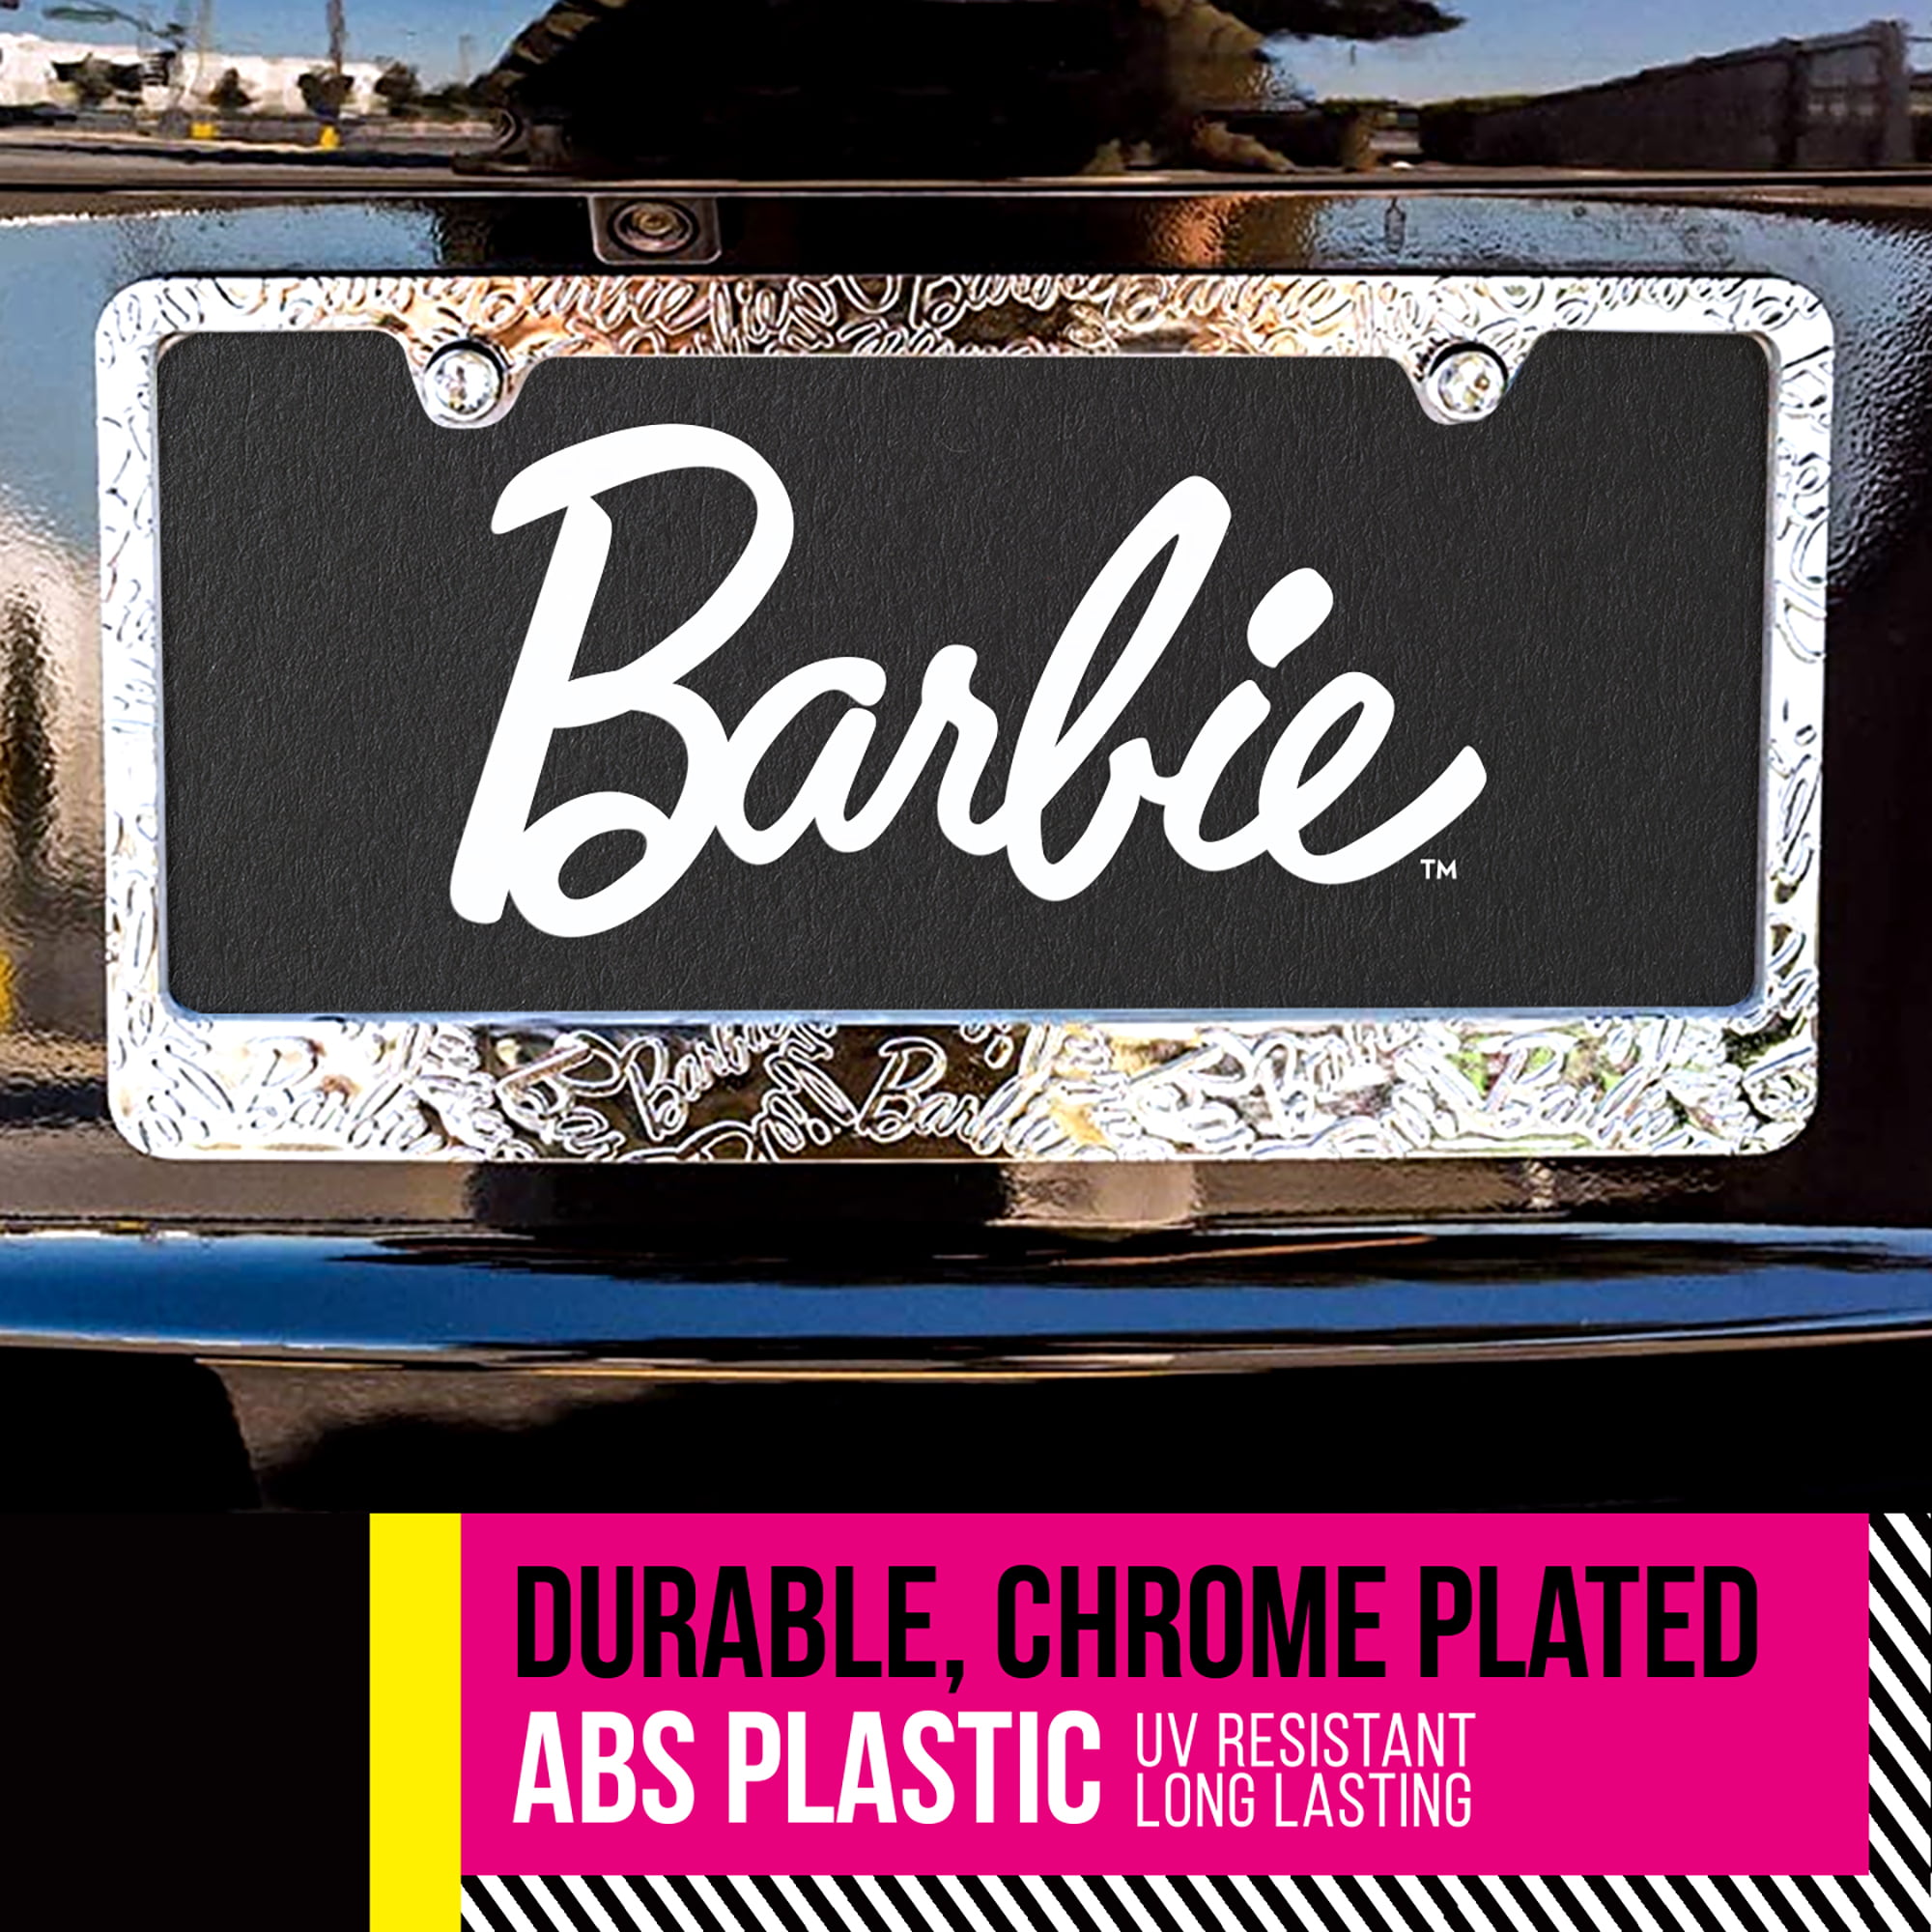 I wanna be like Barbie B*tch that has everything license plate frame